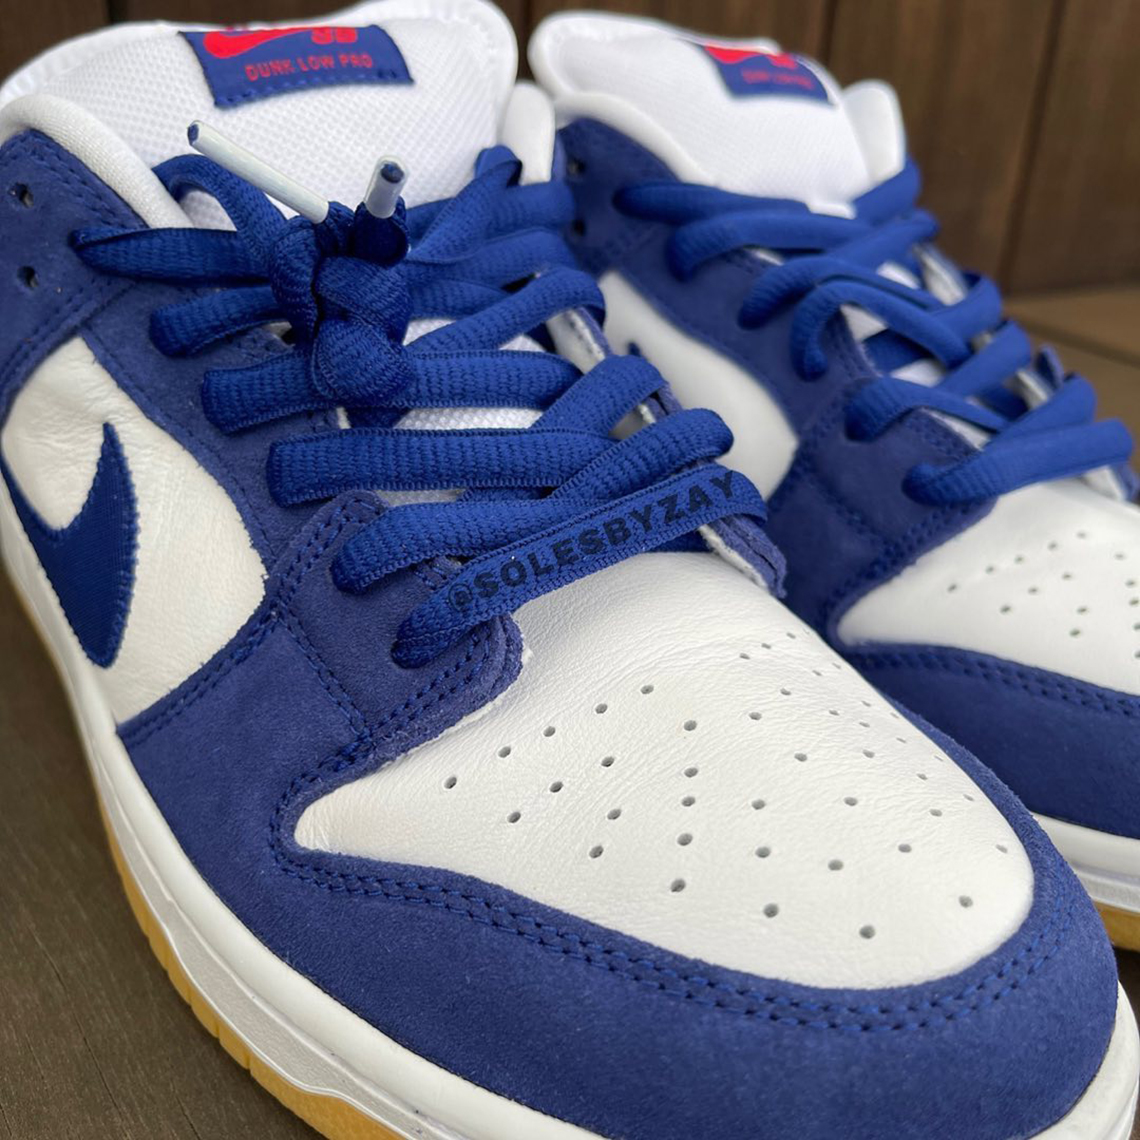 Dodgers News: Jackie Robinson Inspired Nike Dunk Lows Set to